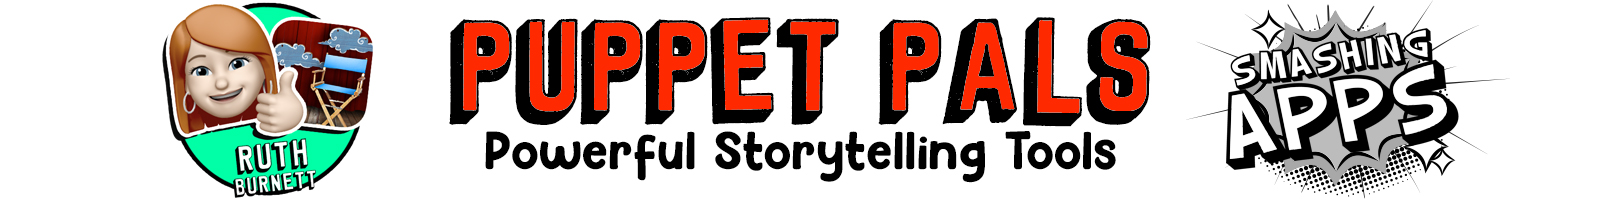 Puppet Pals: Powerful storytelling tools